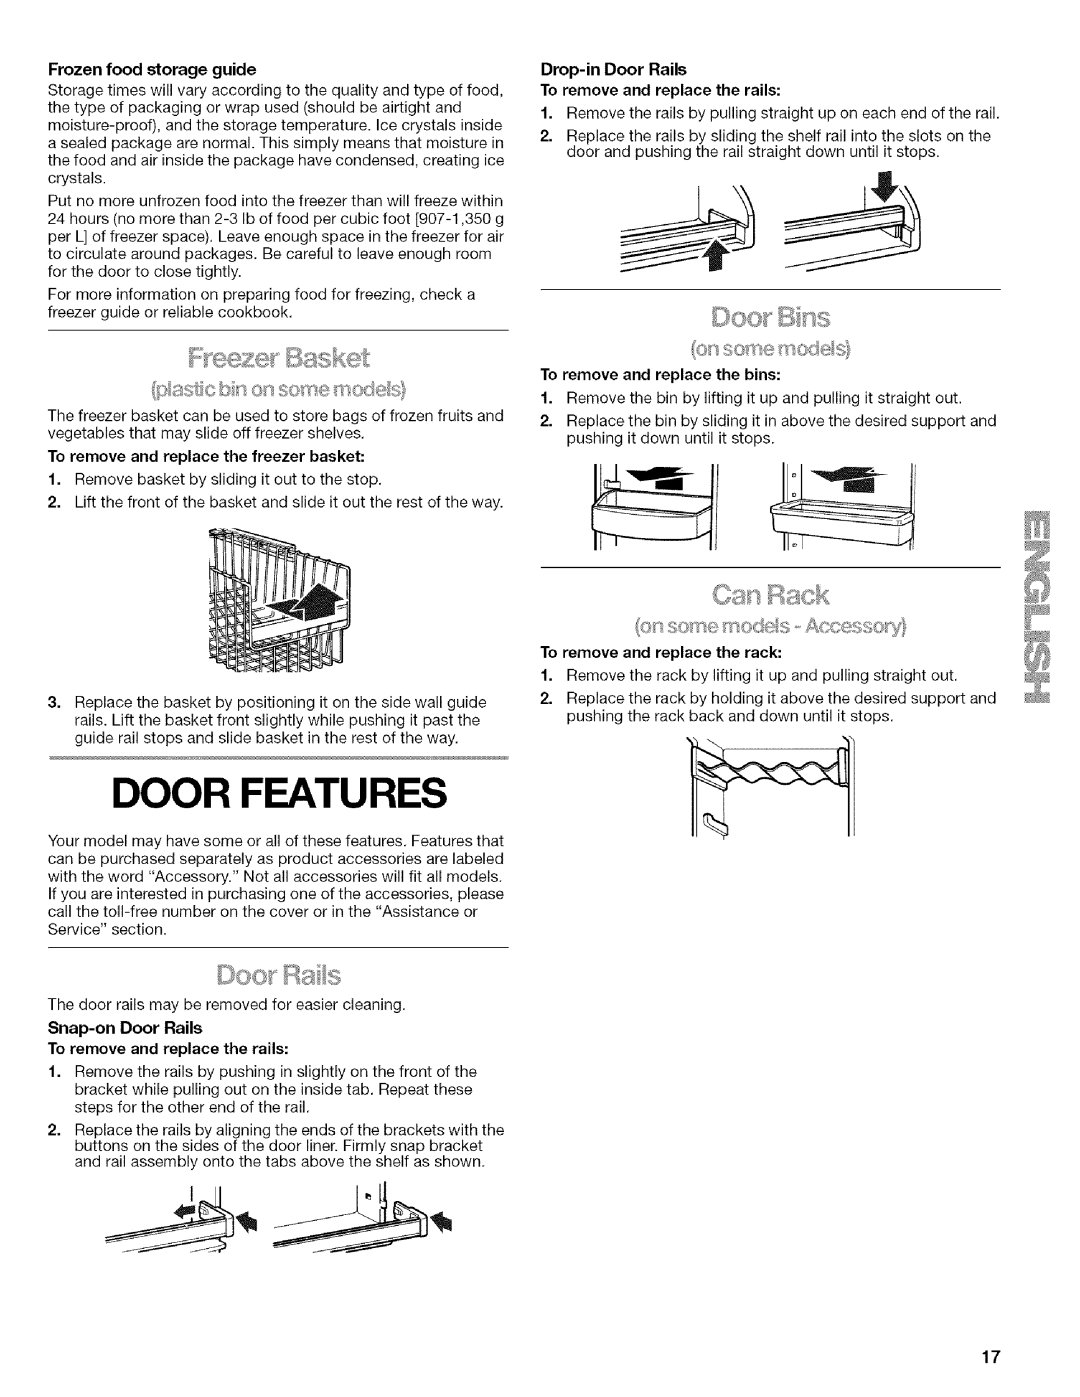 Kenmore 2205960 manual Door Features, Frozen food storage guide, To remove and replace the freezer basket 